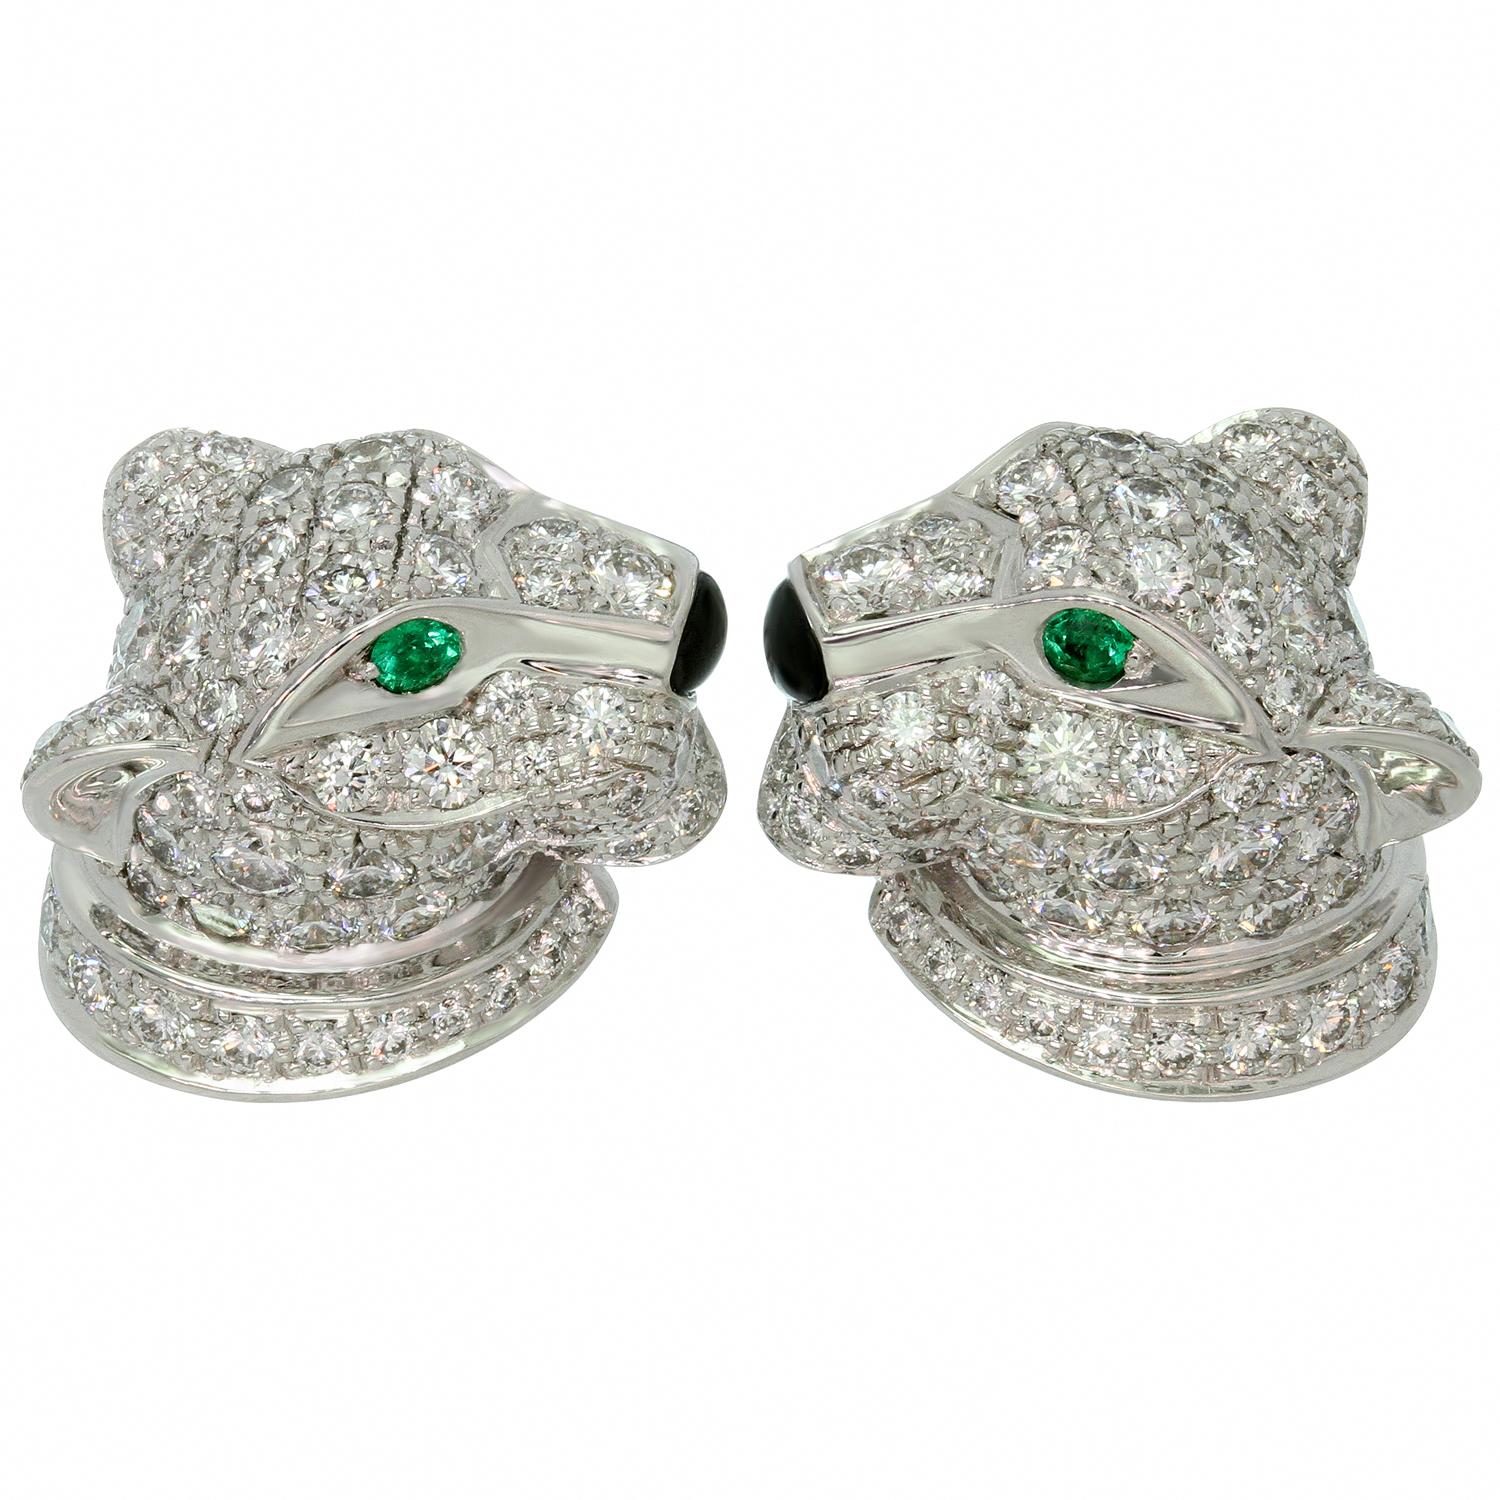 Cartier Panthere Full Pave Diamond Emerald White Gold Cufflinks im Zustand „Hervorragend“ in New York, NY